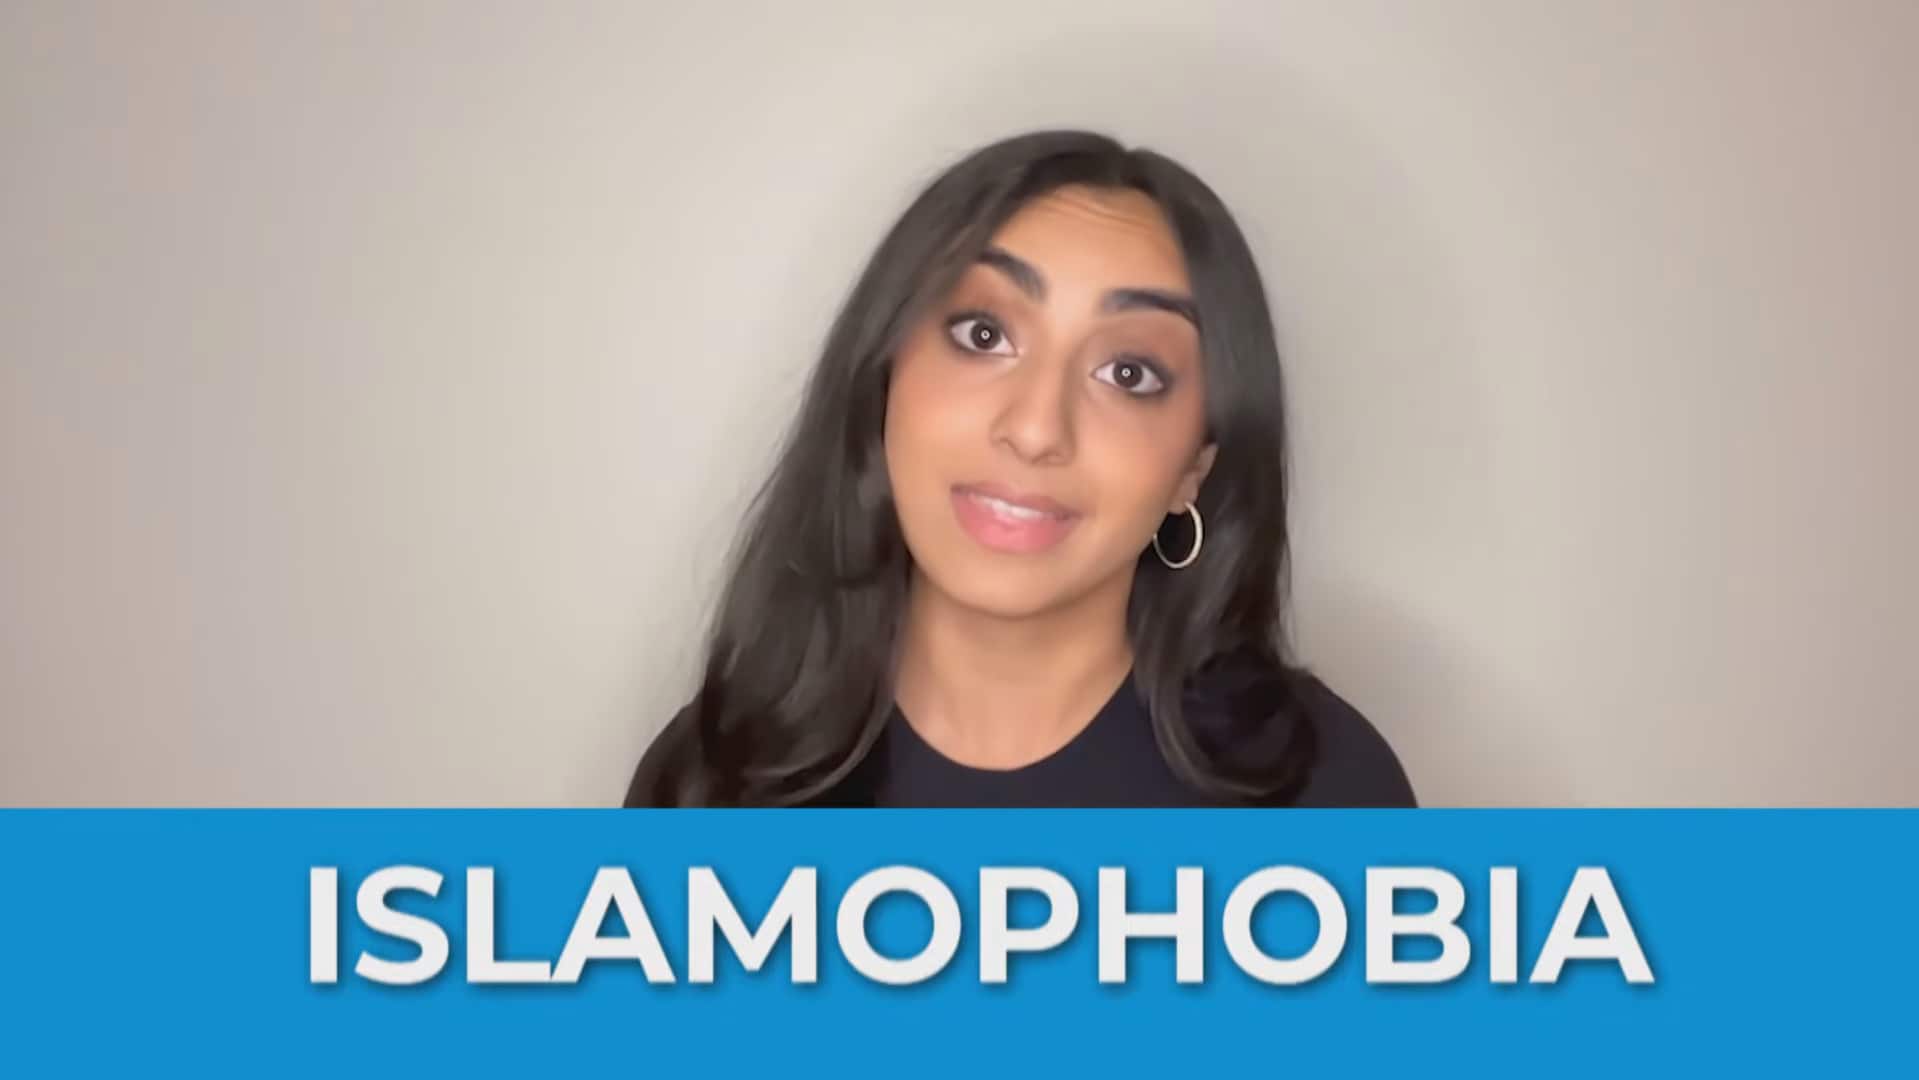 with anti muslim occurrences on the rise schools in canada urged to address islamophobia 1